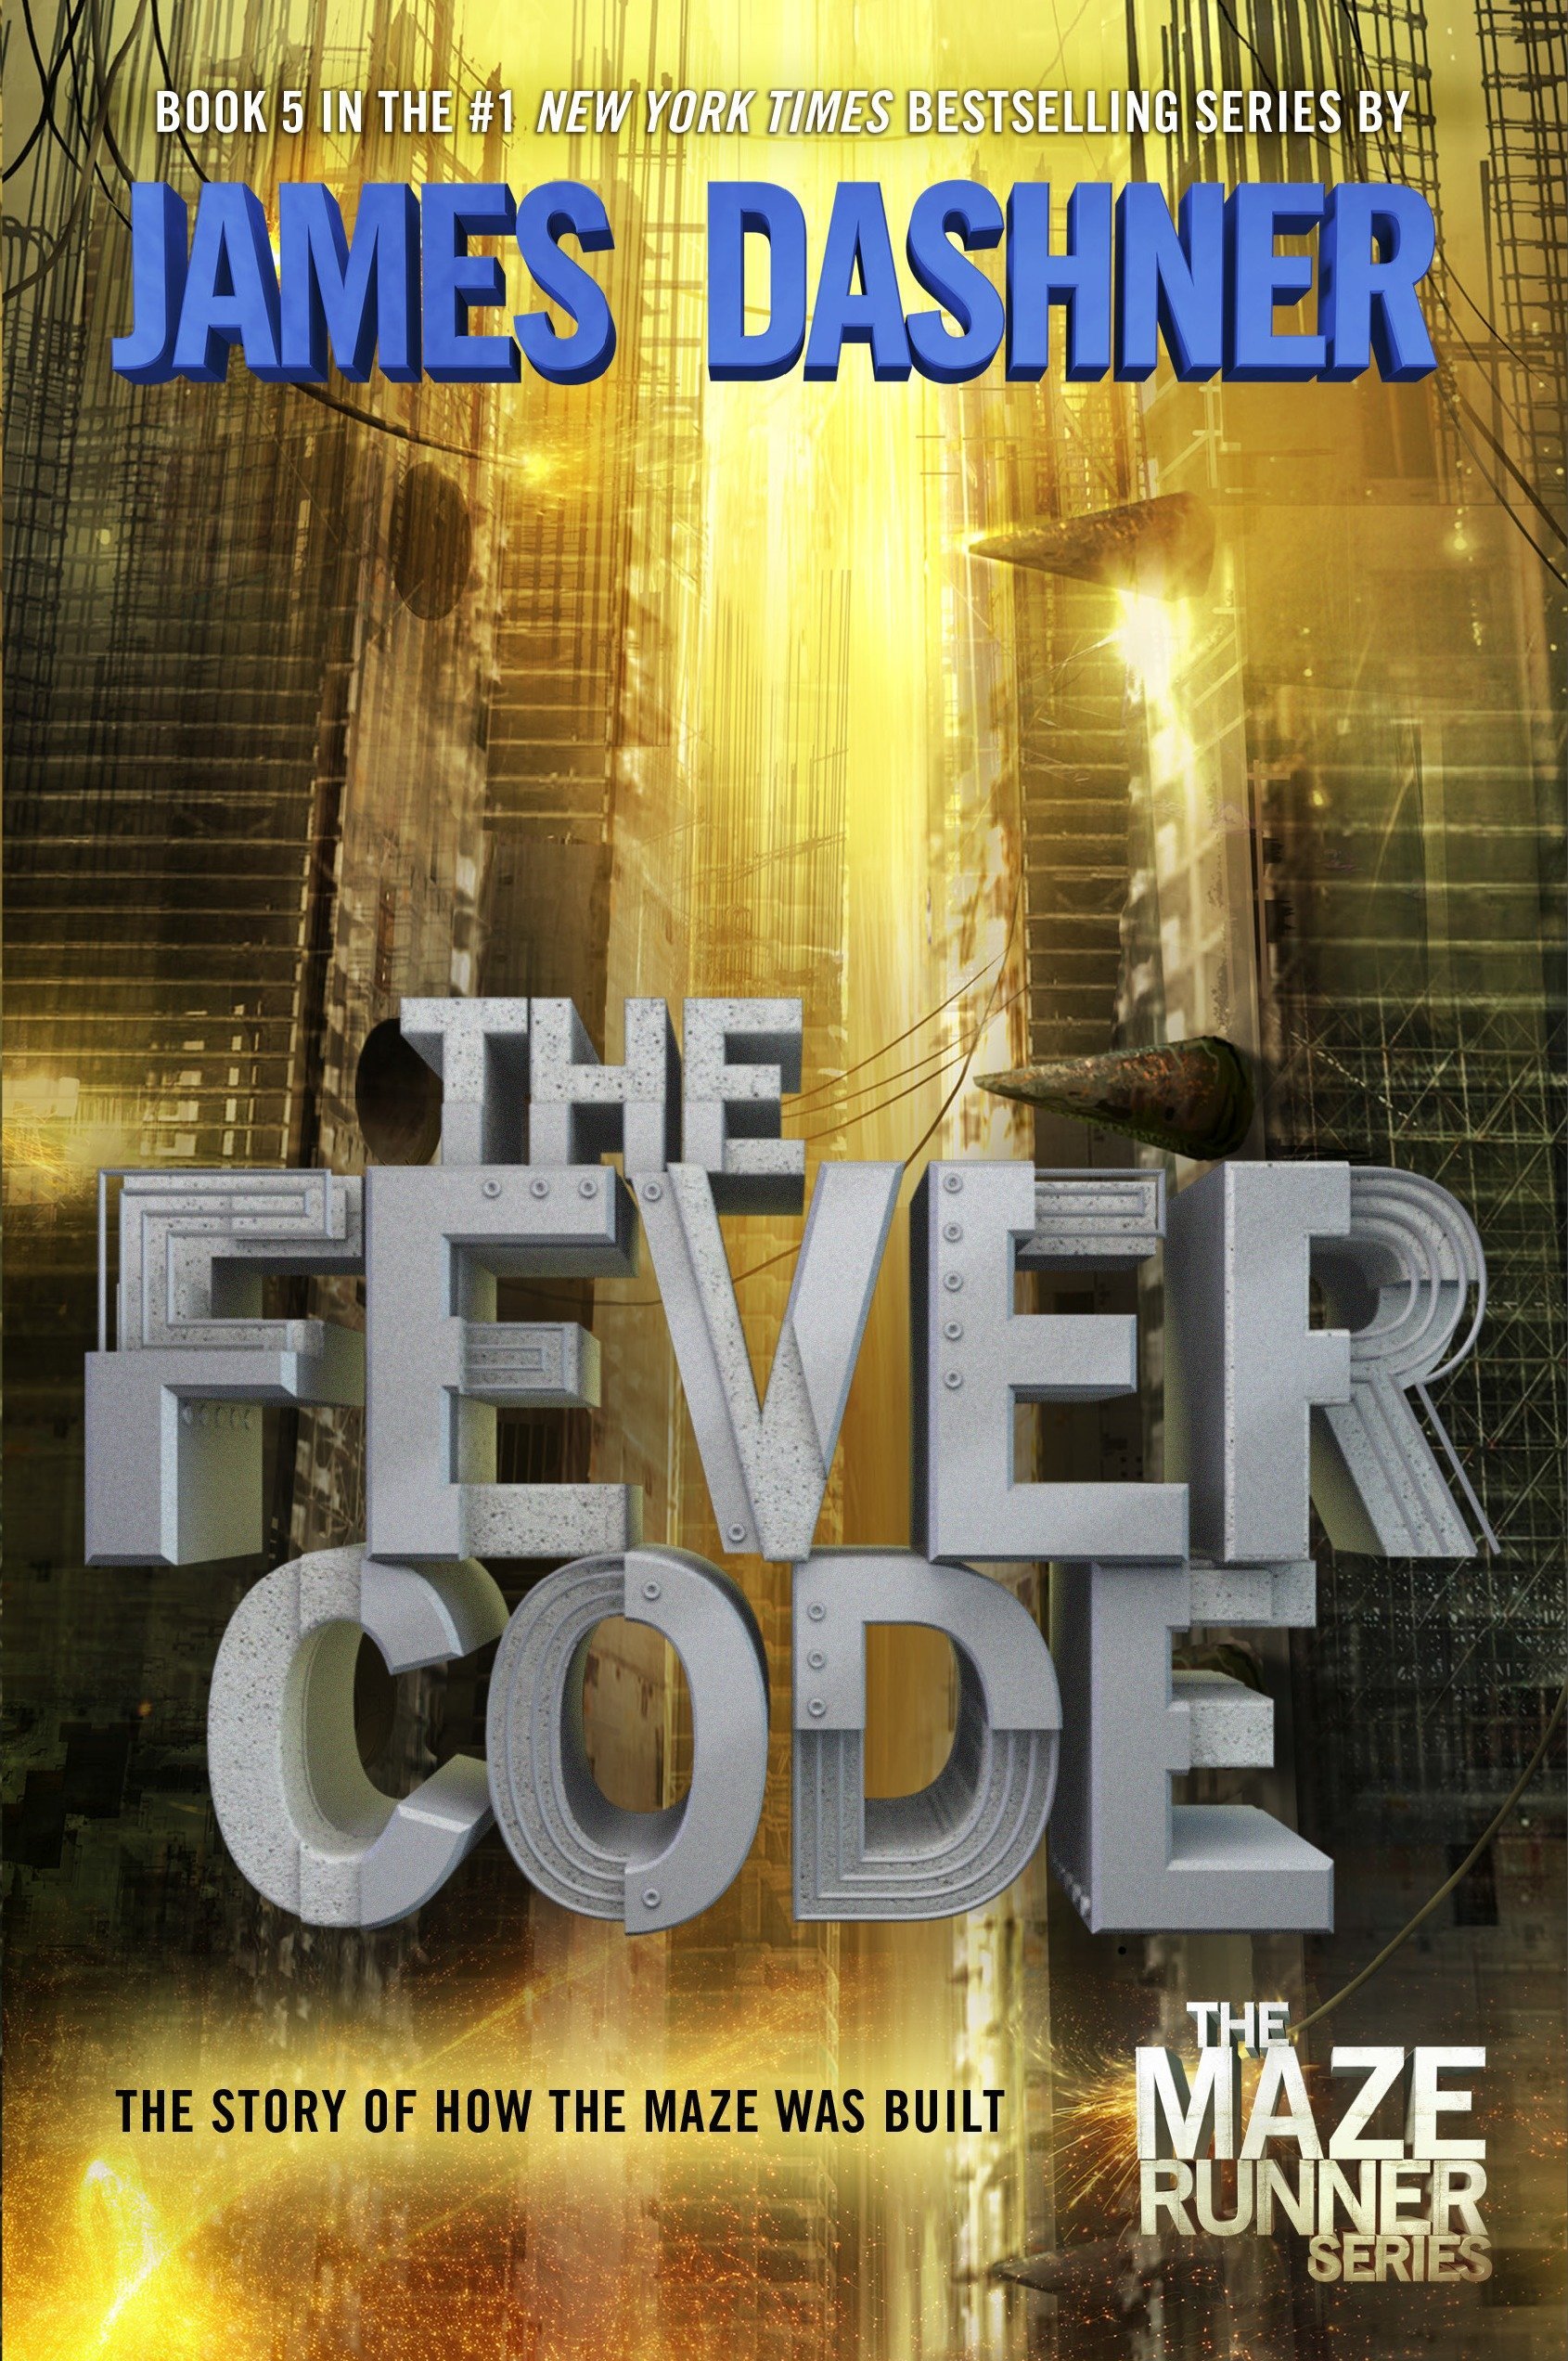 The Fever Code